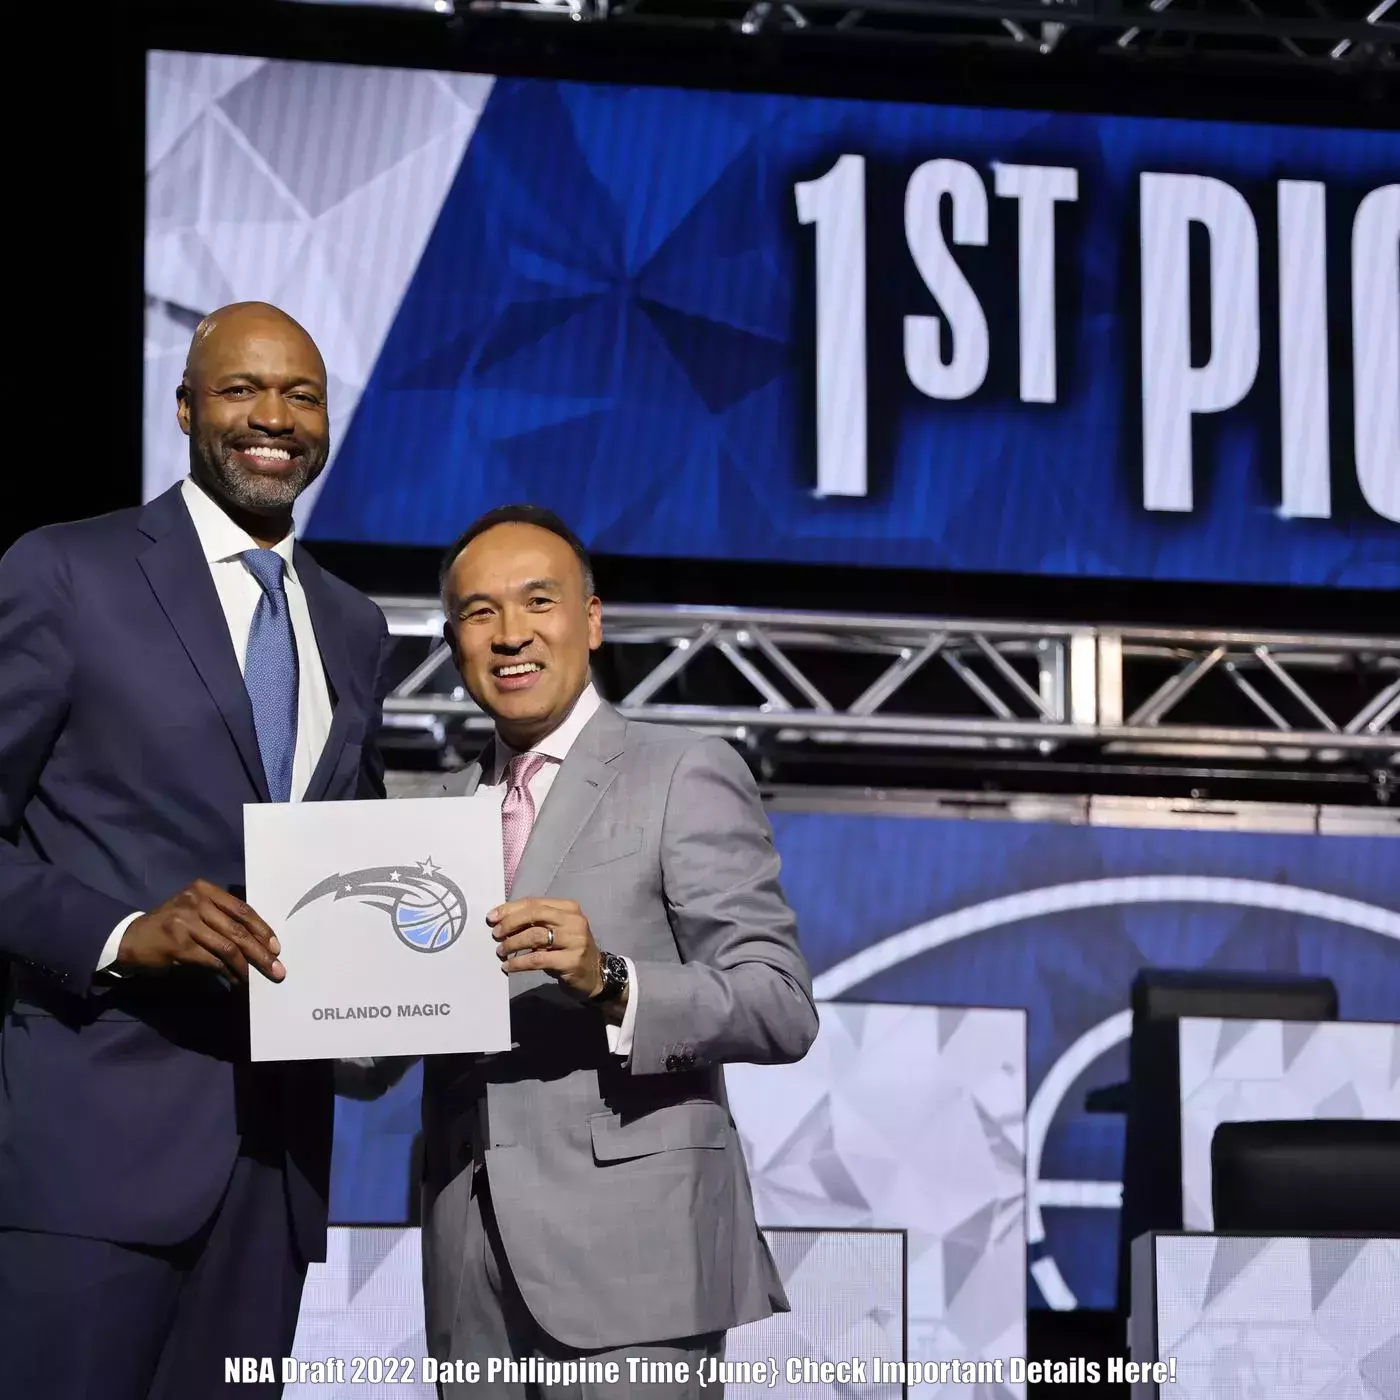 NBA Draft 2022 Date Philippine Time